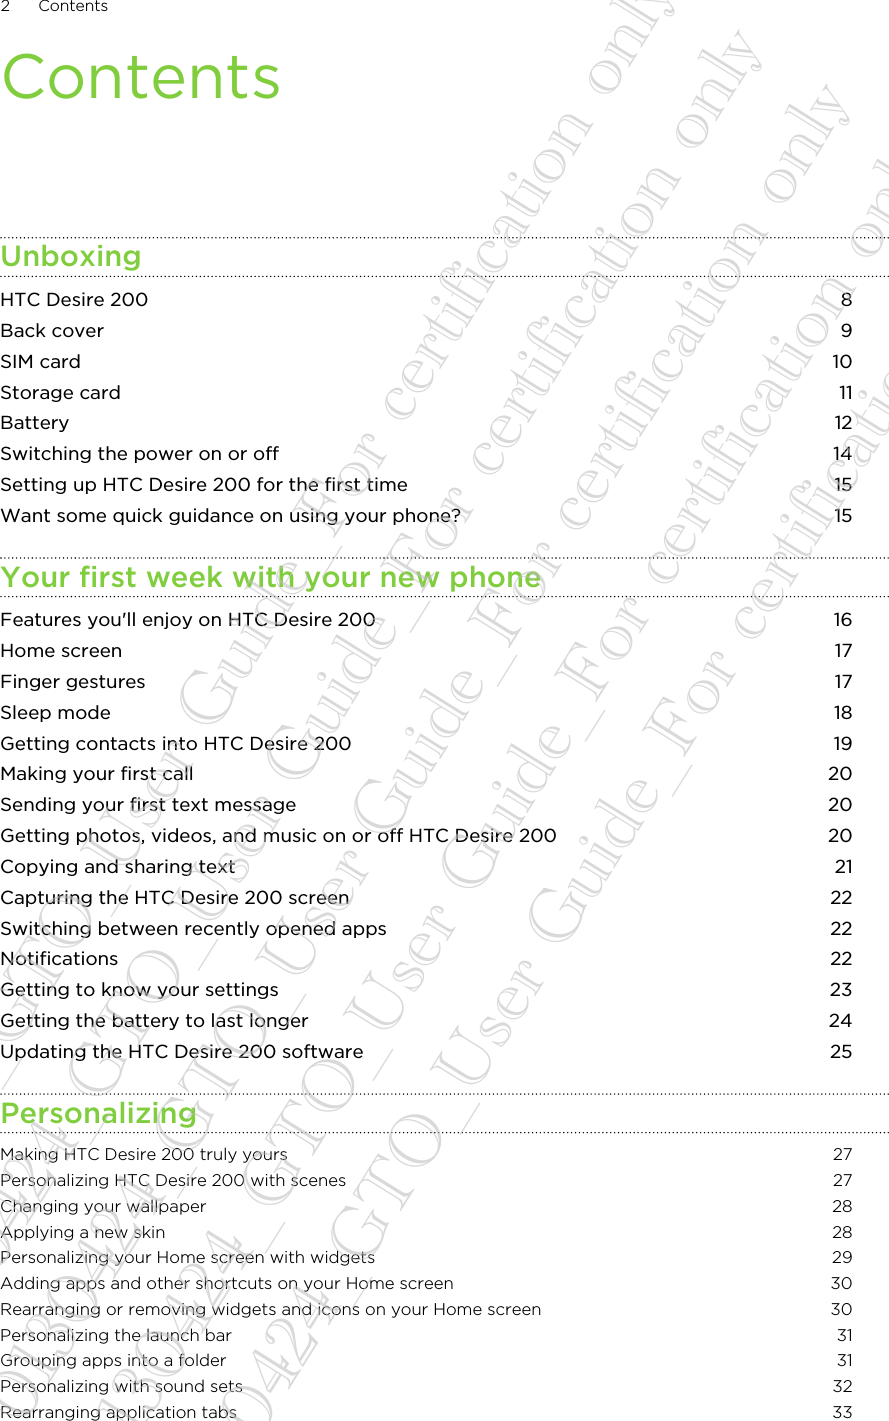 ContentsUnboxingHTC Desire 200 8Back cover 9SIM card 10Storage card 11Battery 12Switching the power on or off 14Setting up HTC Desire 200 for the first time 15Want some quick guidance on using your phone? 15Your first week with your new phoneFeatures you&apos;ll enjoy on HTC Desire 200 16Home screen 17Finger gestures 17Sleep mode 18Getting contacts into HTC Desire 200 19Making your first call 20Sending your first text message 20Getting photos, videos, and music on or off HTC Desire 200 20Copying and sharing text 21Capturing the HTC Desire 200 screen 22Switching between recently opened apps 22Notifications 22Getting to know your settings 23Getting the battery to last longer 24Updating the HTC Desire 200 software 25PersonalizingMaking HTC Desire 200 truly yours 27Personalizing HTC Desire 200 with scenes 27Changing your wallpaper 28Applying a new skin 28Personalizing your Home screen with widgets 29Adding apps and other shortcuts on your Home screen 30Rearranging or removing widgets and icons on your Home screen 30Personalizing the launch bar 31Grouping apps into a folder 31Personalizing with sound sets 32Rearranging application tabs 332 Contents20130424_GTO_User Guide_For certification only 20130424_GTO_User Guide_For certification only 20130424_GTO_User Guide_For certification only 20130424_GTO_User Guide_For certification only 20130424_GTO_User Guide_For certification only